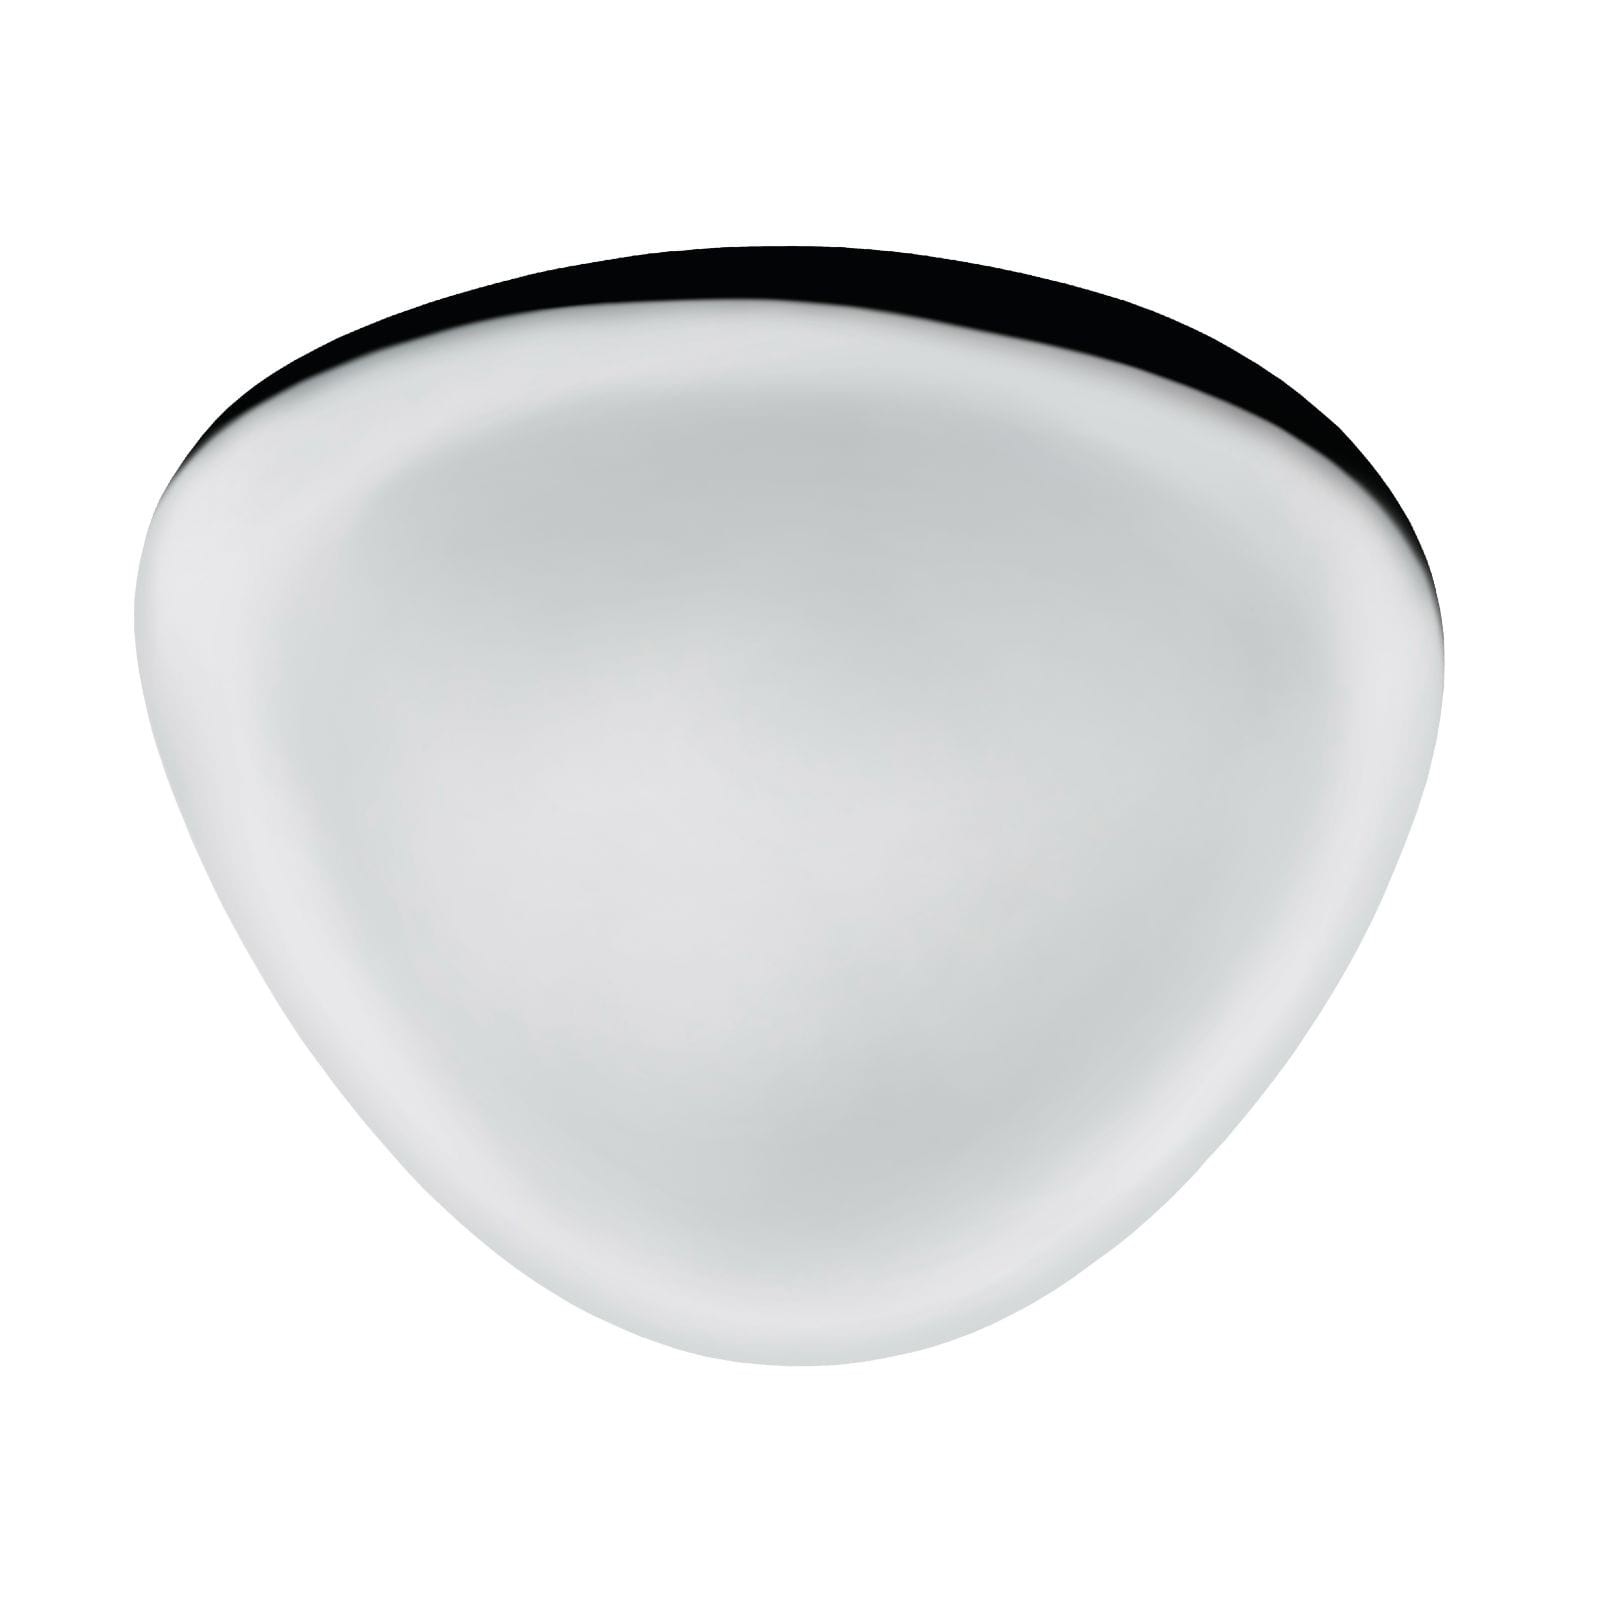 Colombina Tray (Stainless Steel) - Alessi